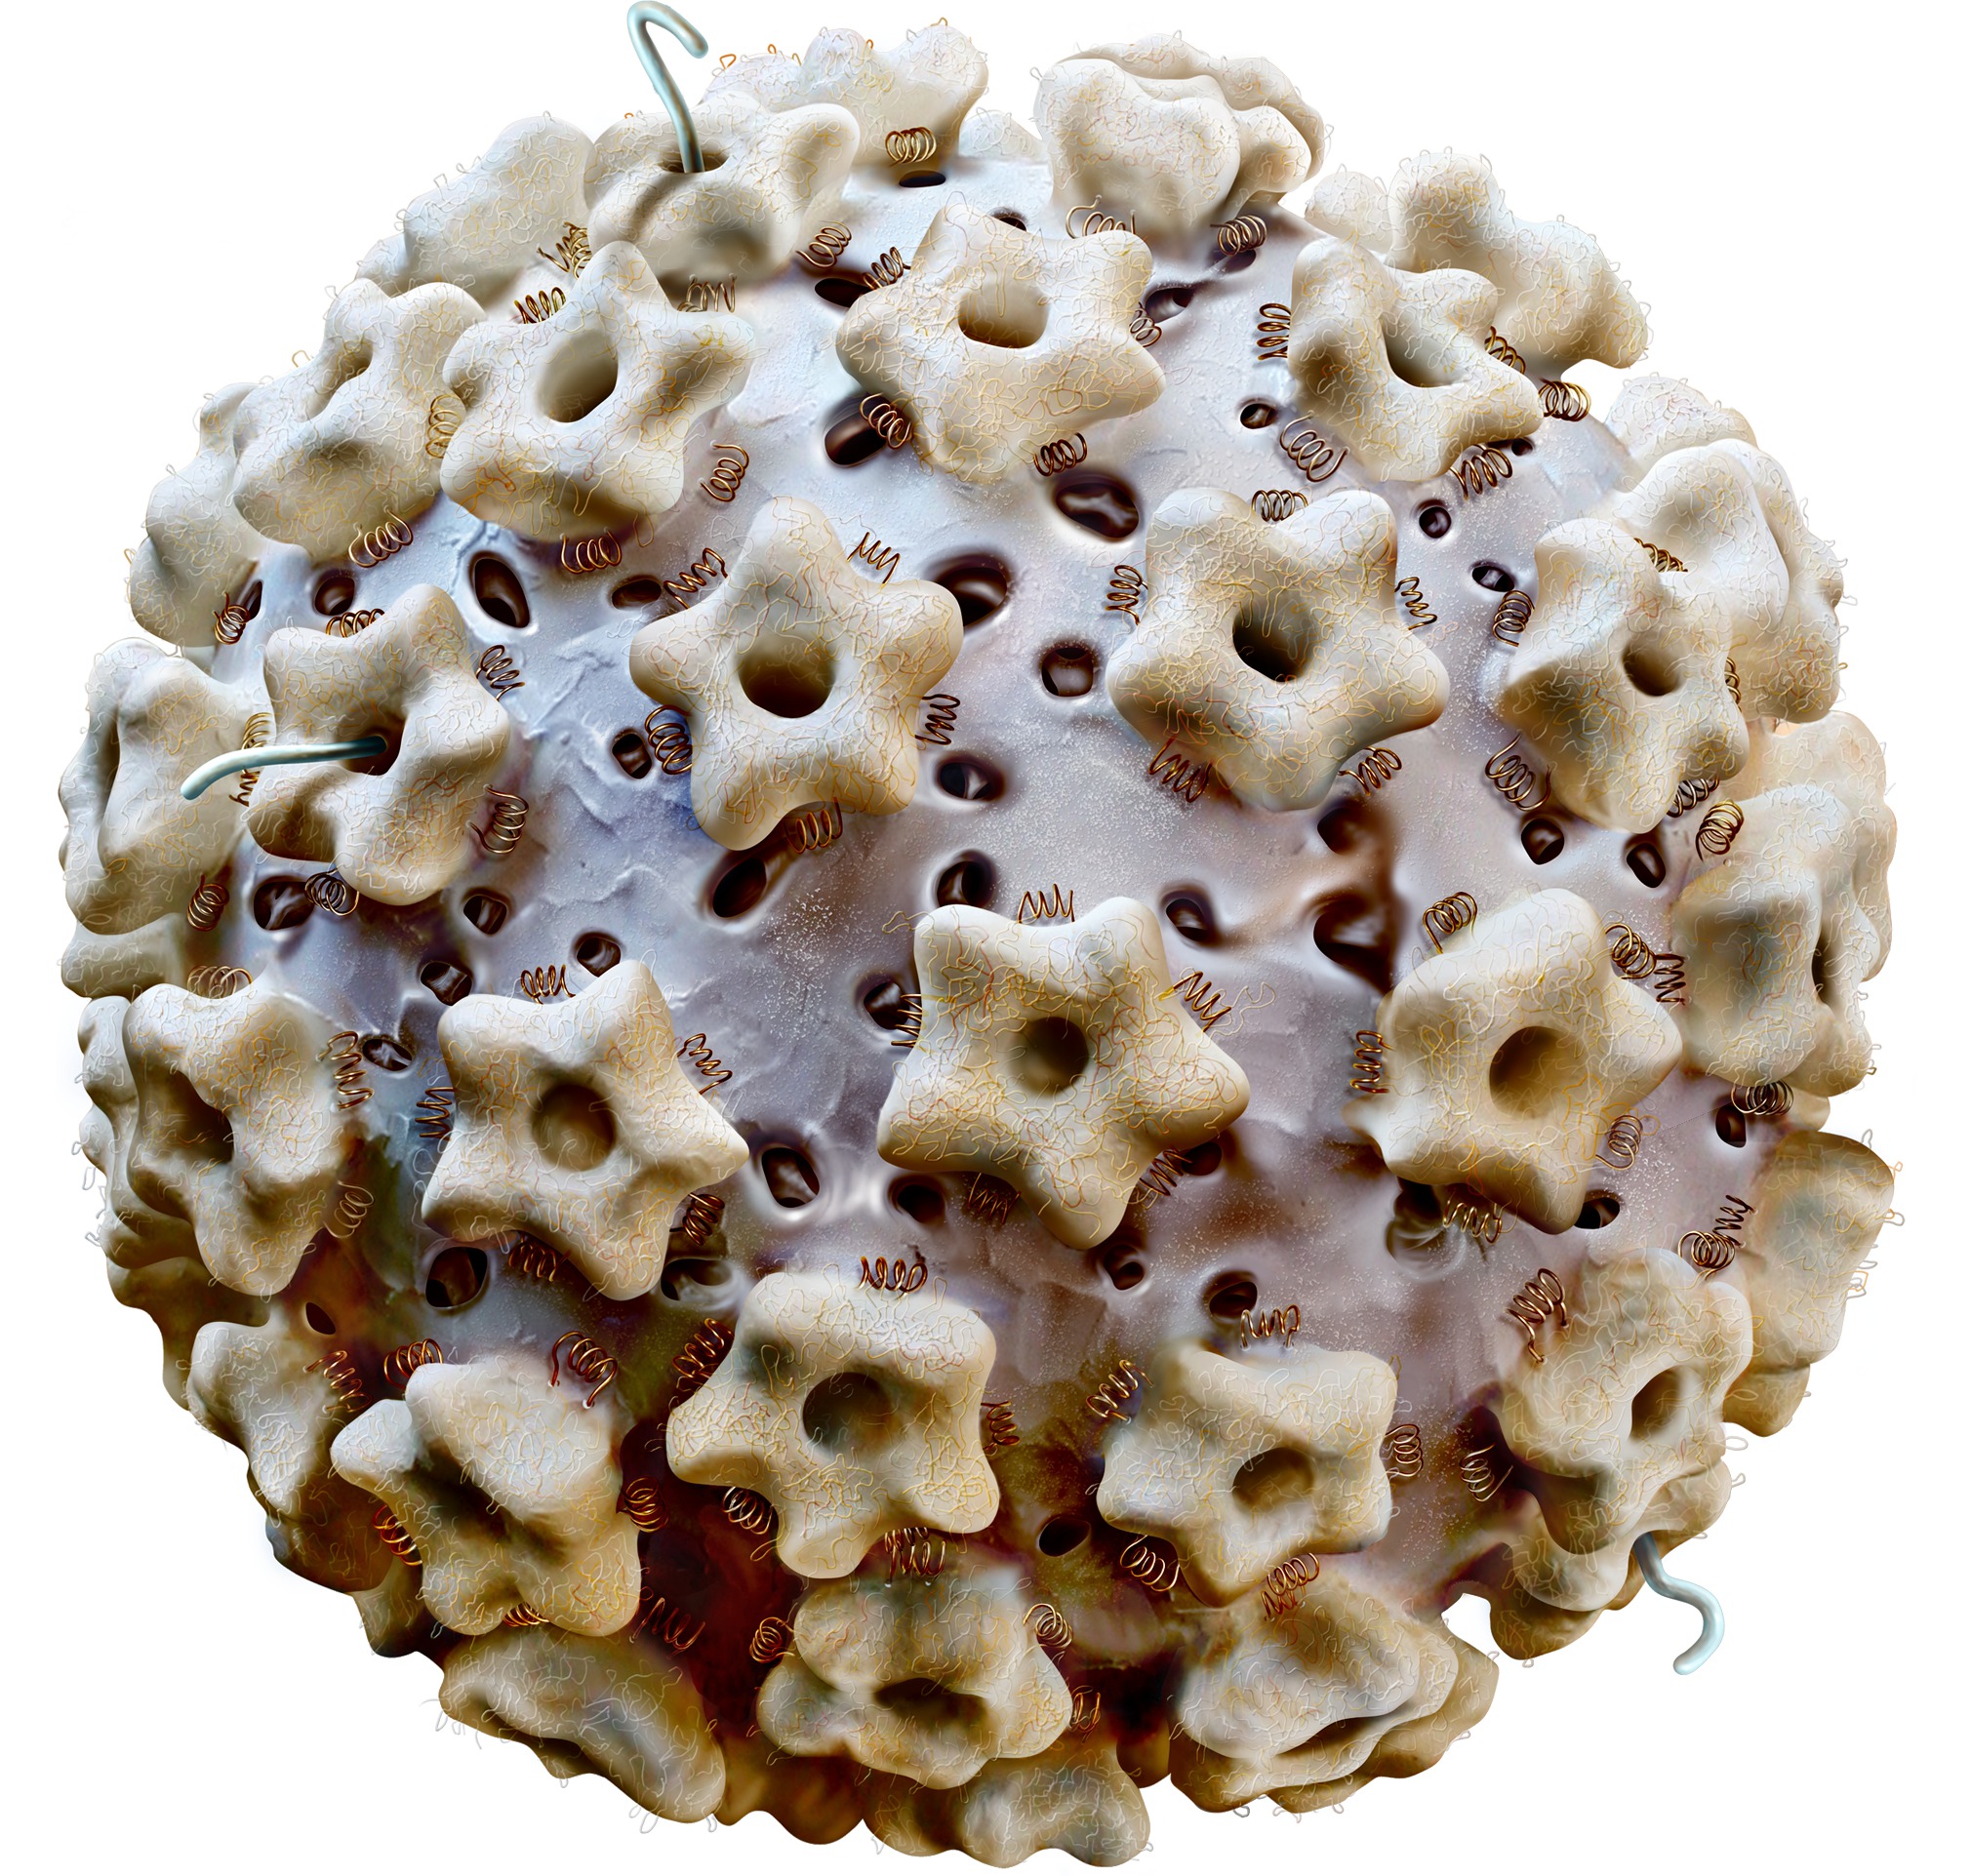 what causes hpv